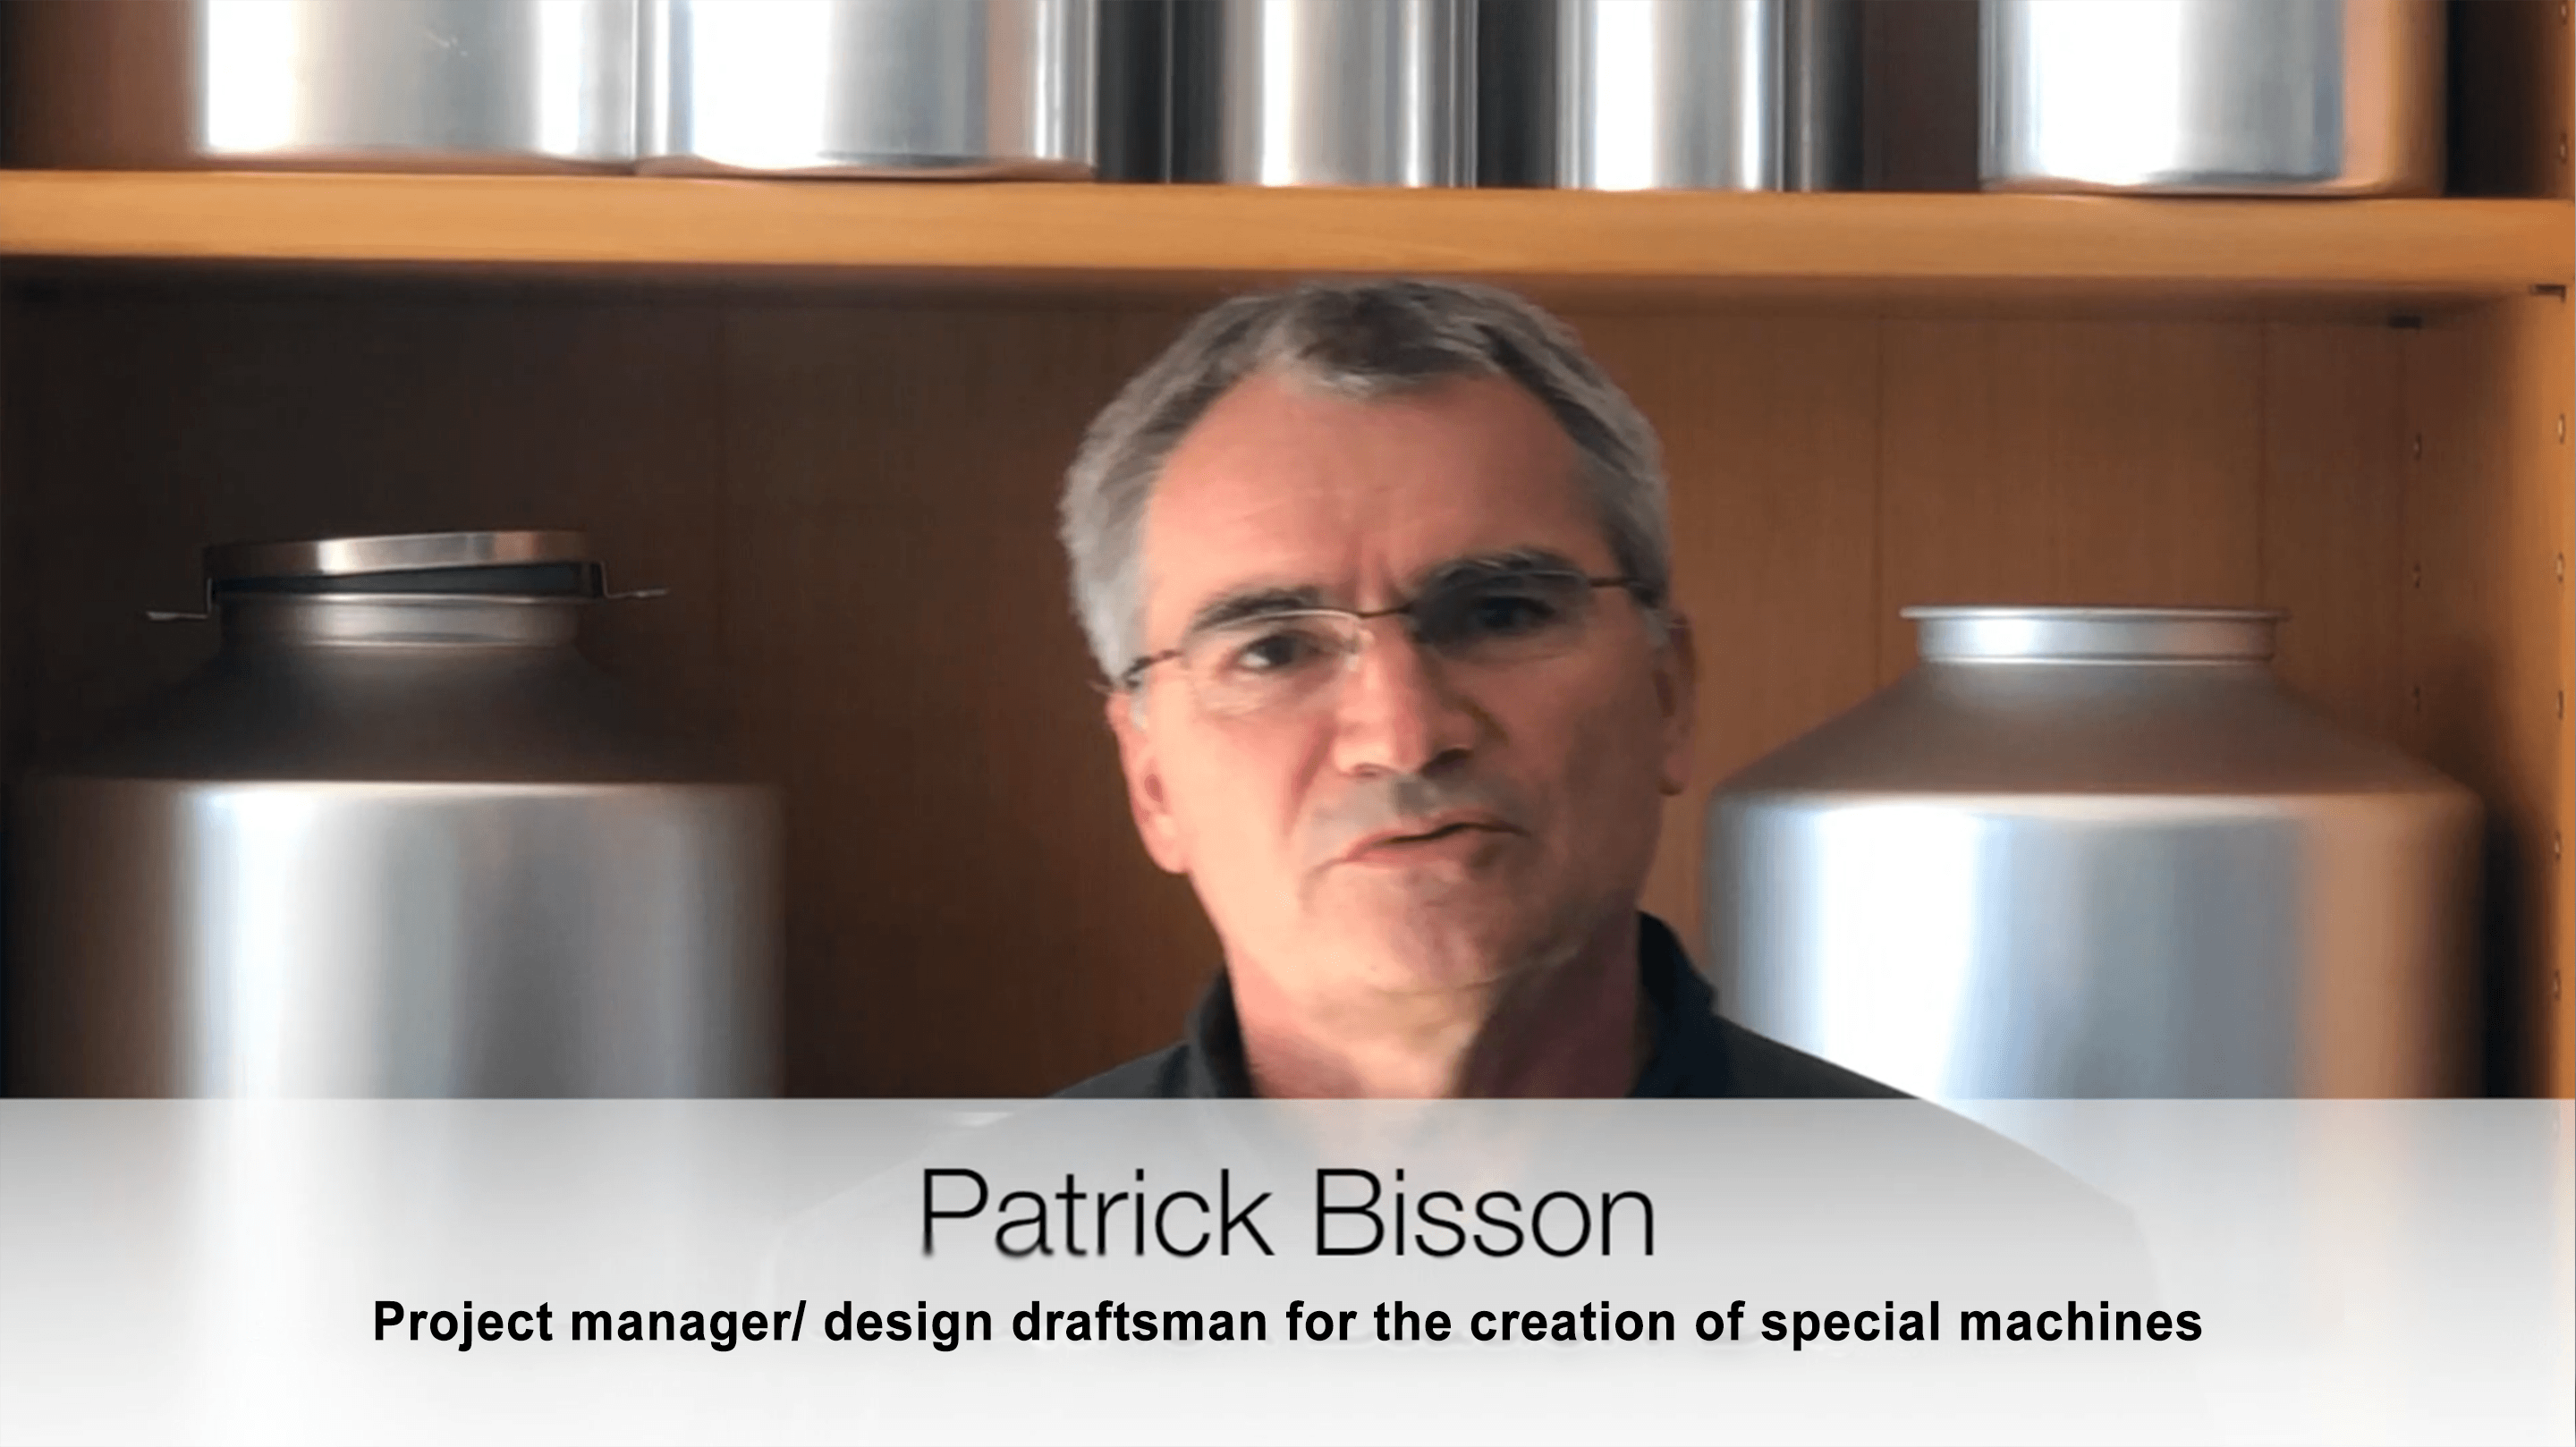 Testimony, Patrick Bisson, project manager and design draftsman for Tournaire for 30 years.